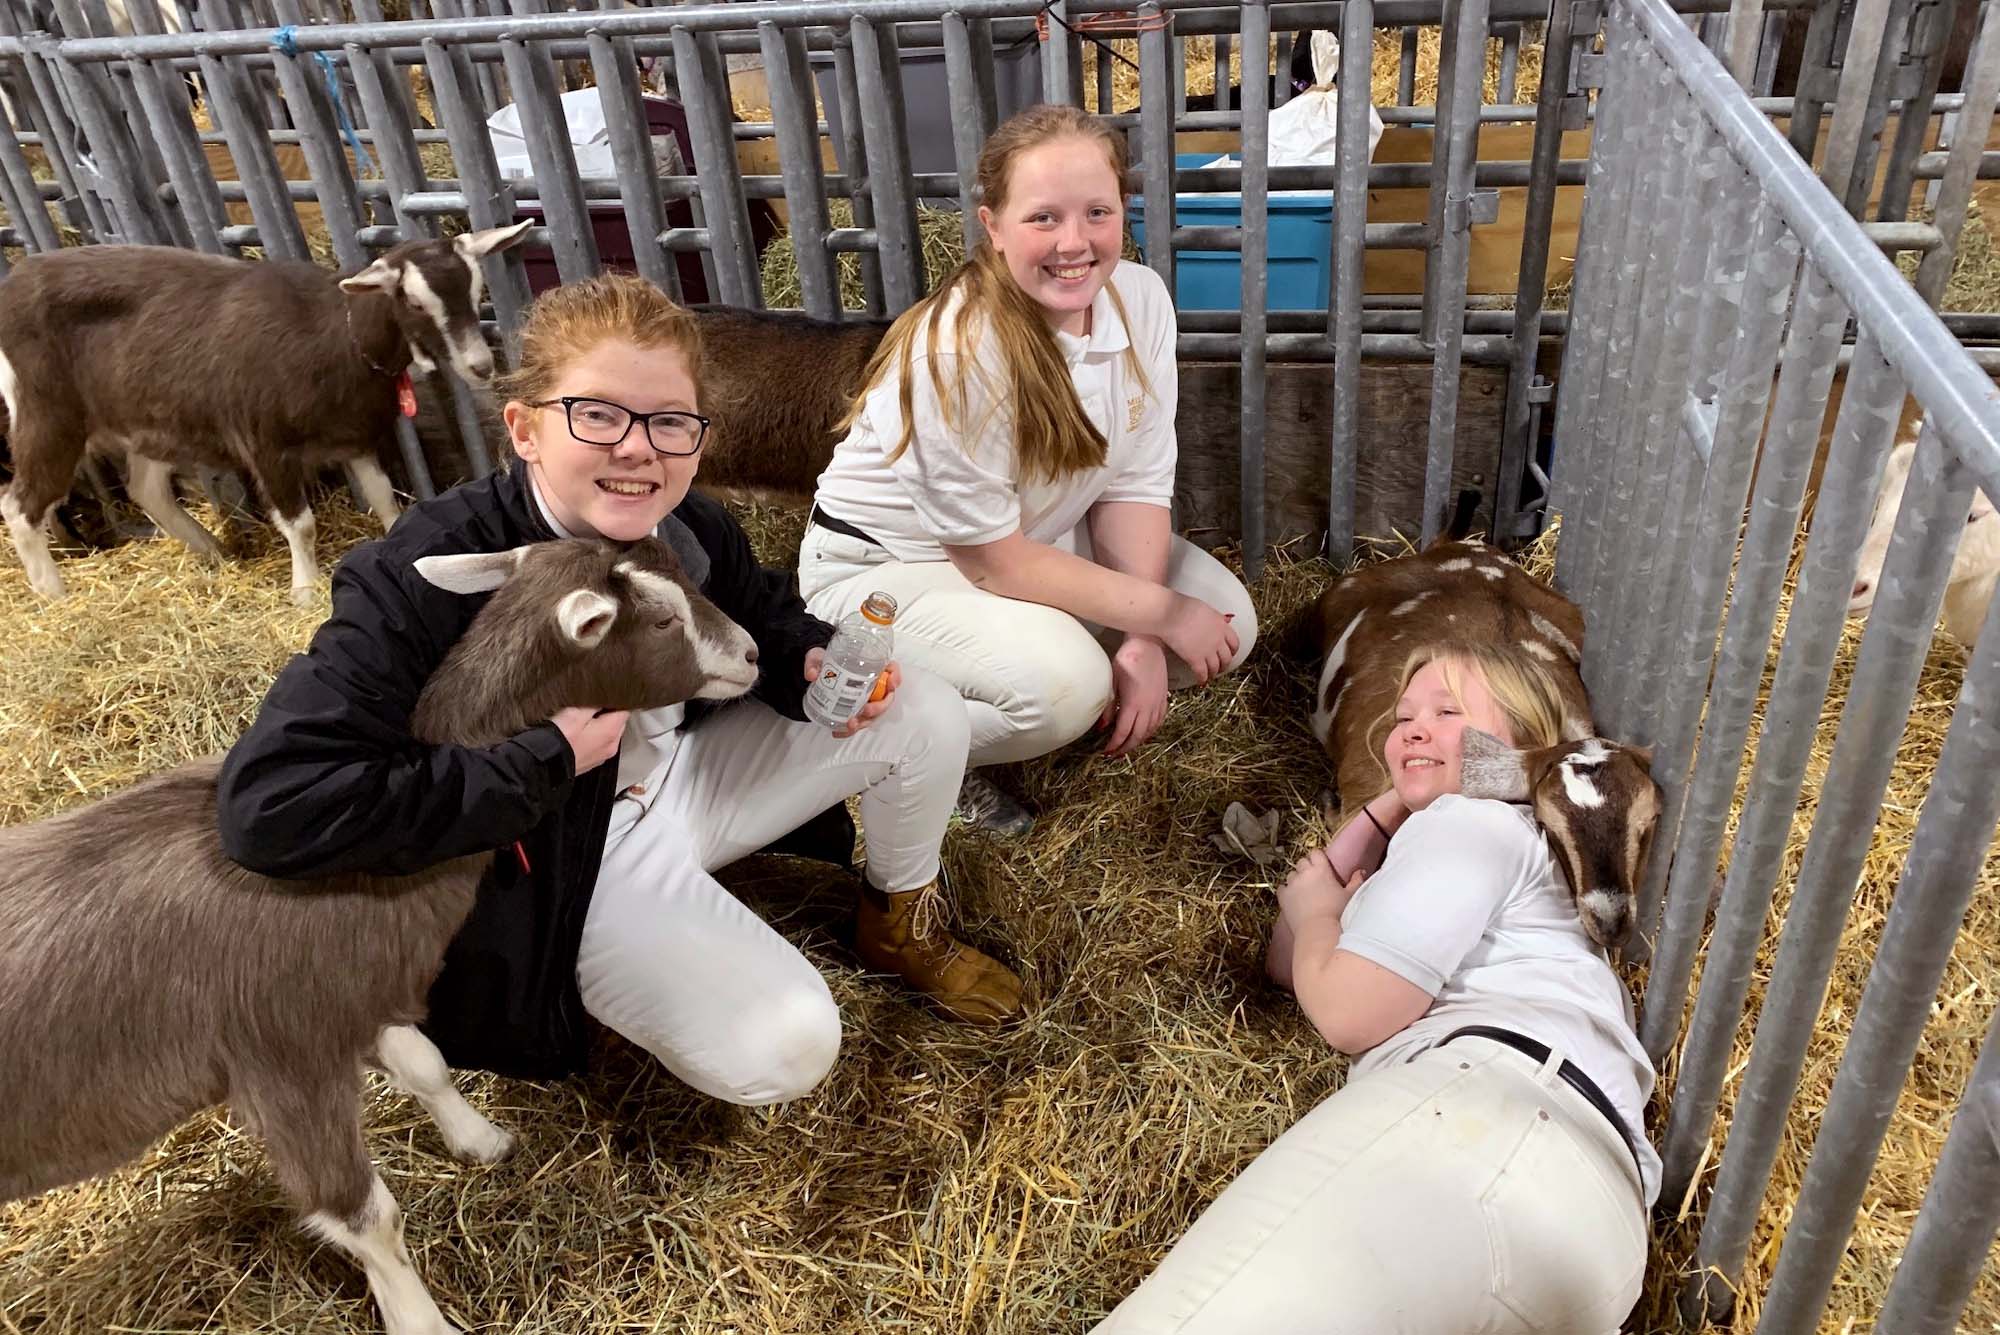 Milton Hershey School Agricultural and Environmental Education students take a break with their goats during the PA Farm Show.